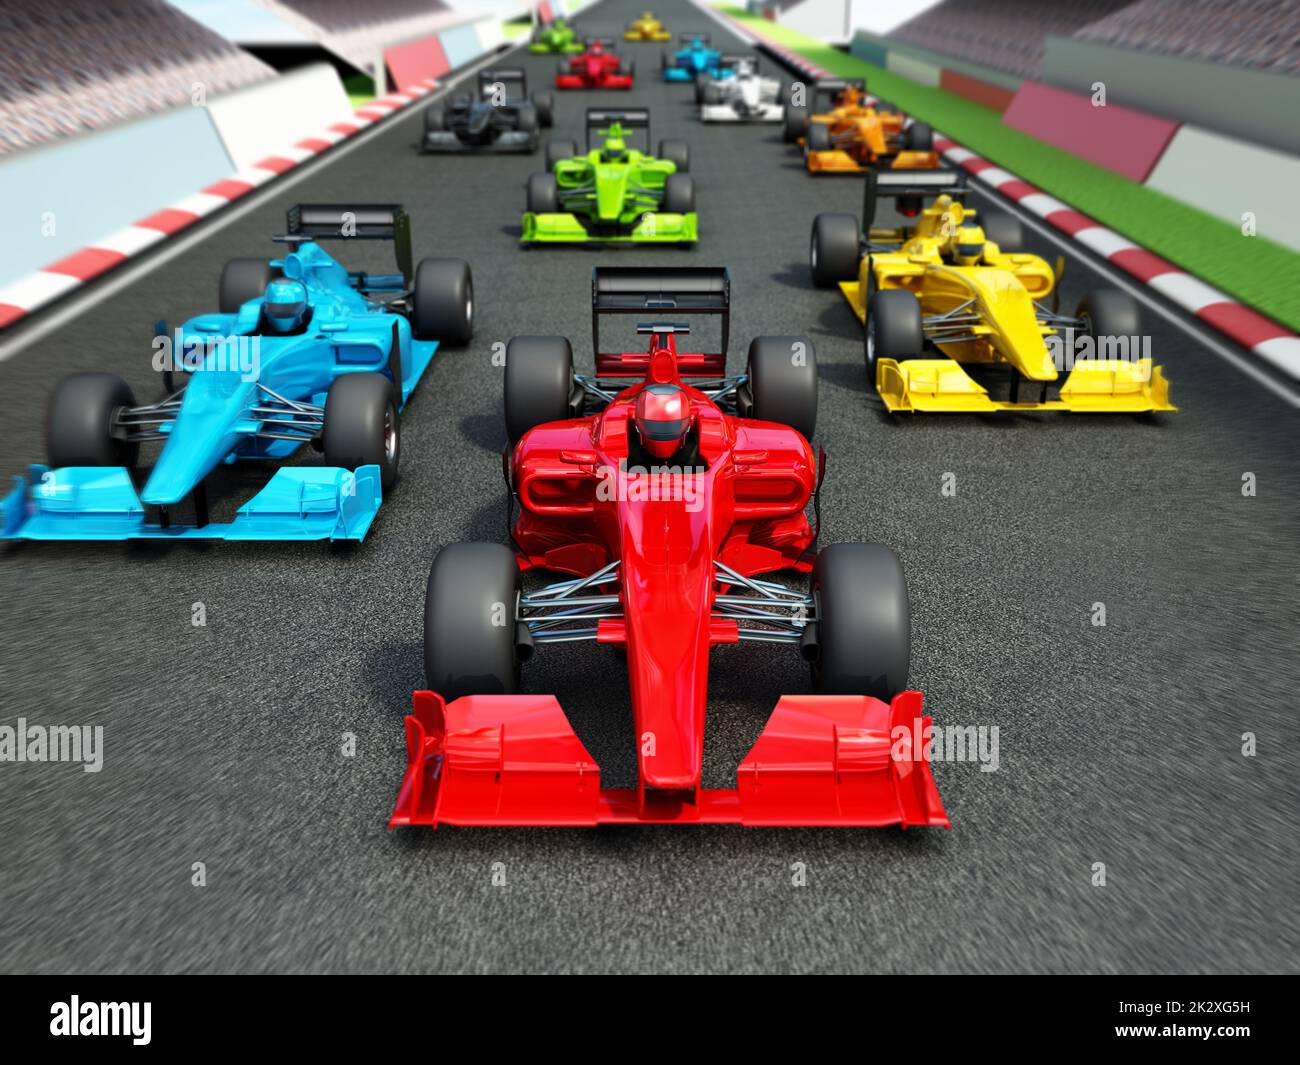 Brandless racing cars on the race track. 3D illustration Stock Photo